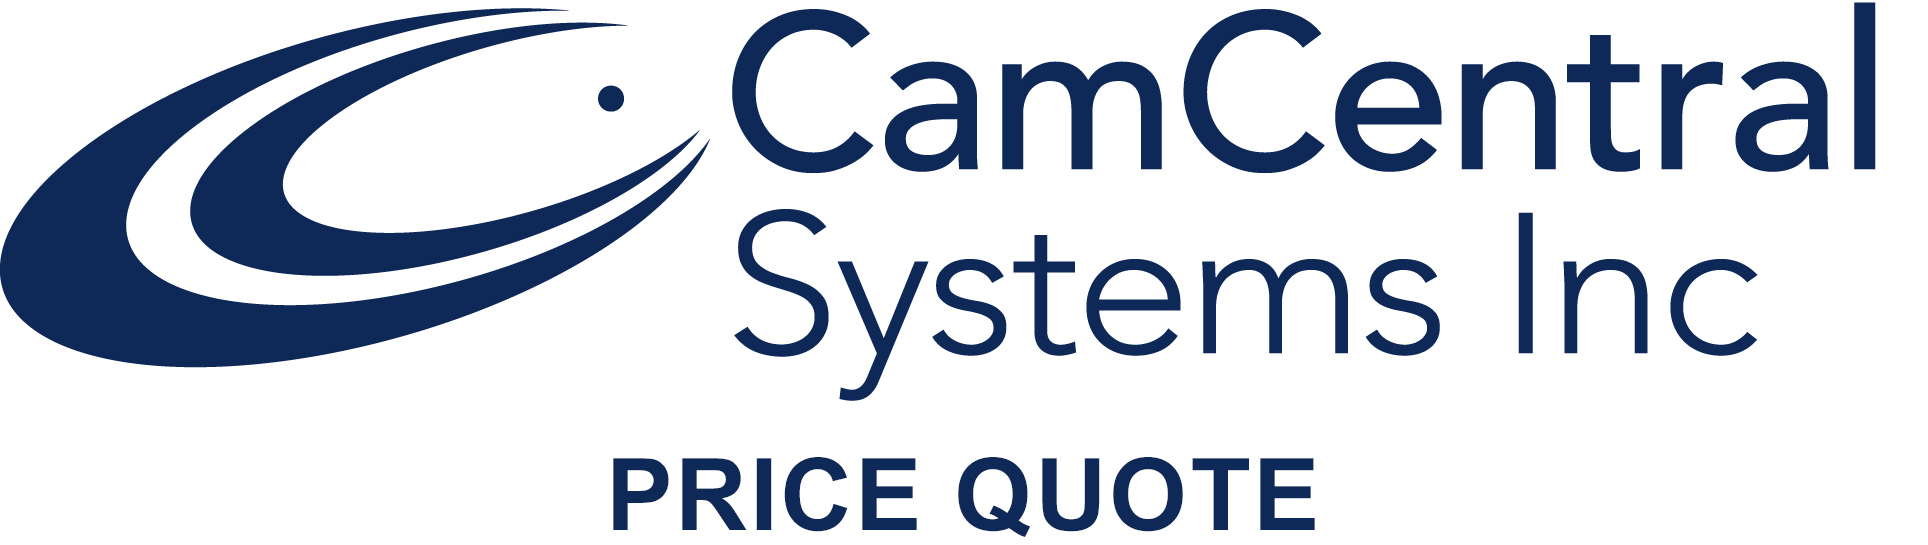 CamCentral Systems Inc.